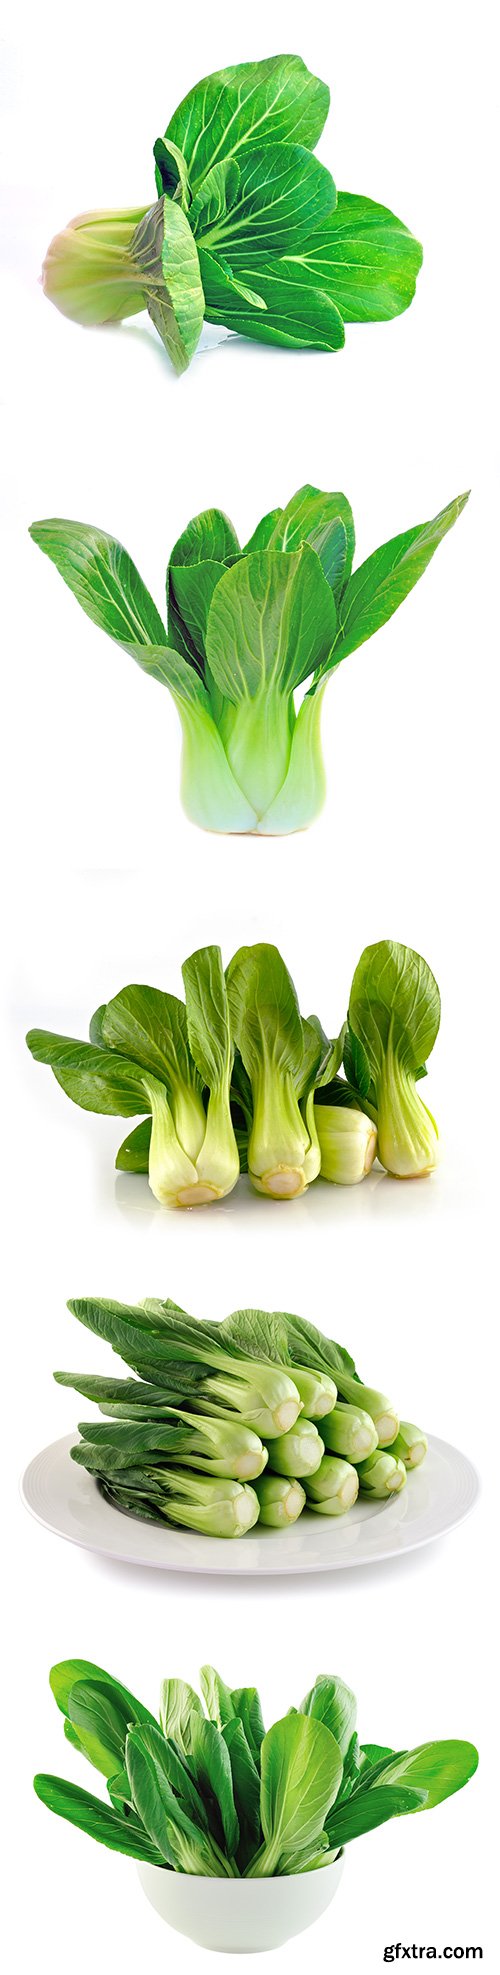 Bok Choy (Chinese Cabbage) Isolated - 9xJPGs